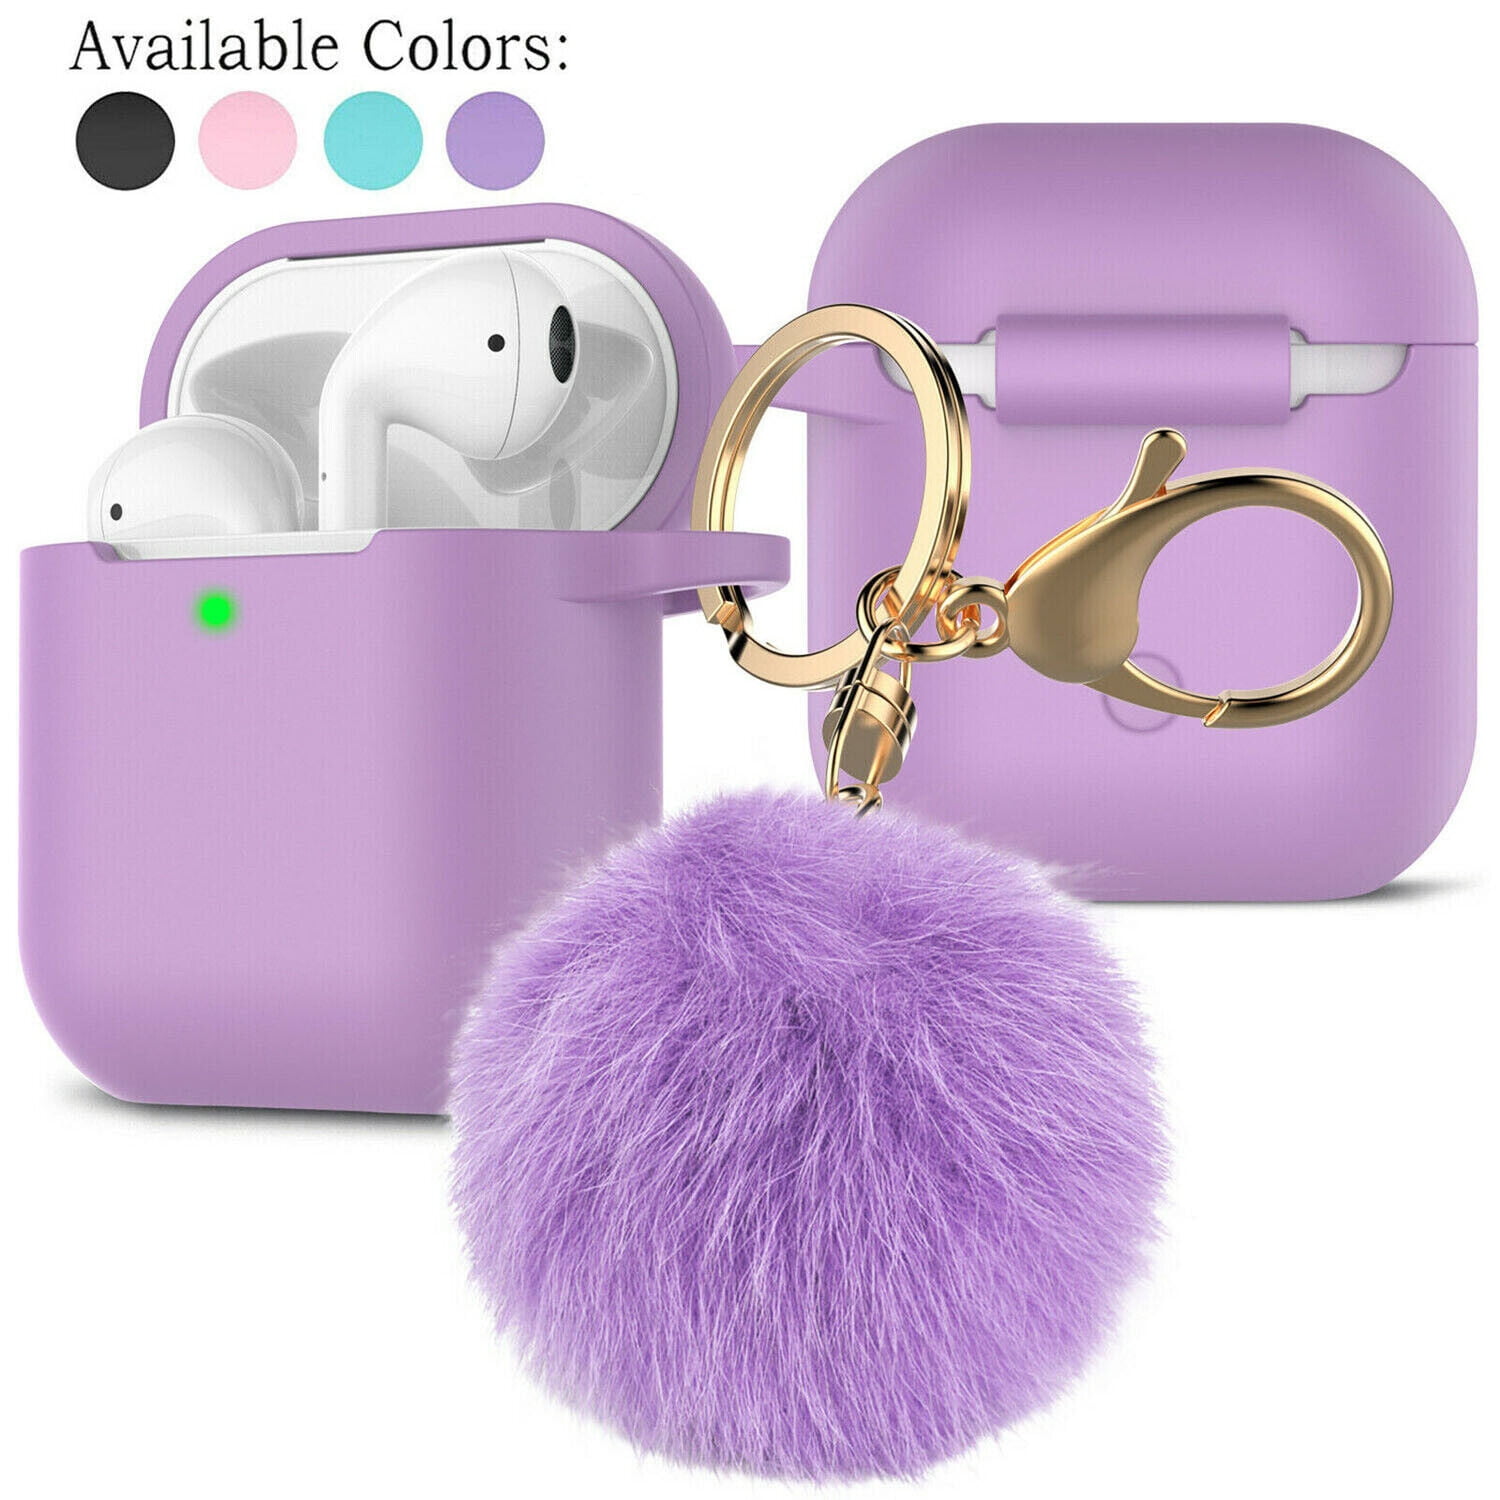  Case for AirPods Pro 1st Generation, Filoto Airpod Pro Case  Cover for Apple AirPods Pro (2019), Cute Protective Silicone Case  Accessories with Pompom Keychain for Women Girl (Black) : Electronics